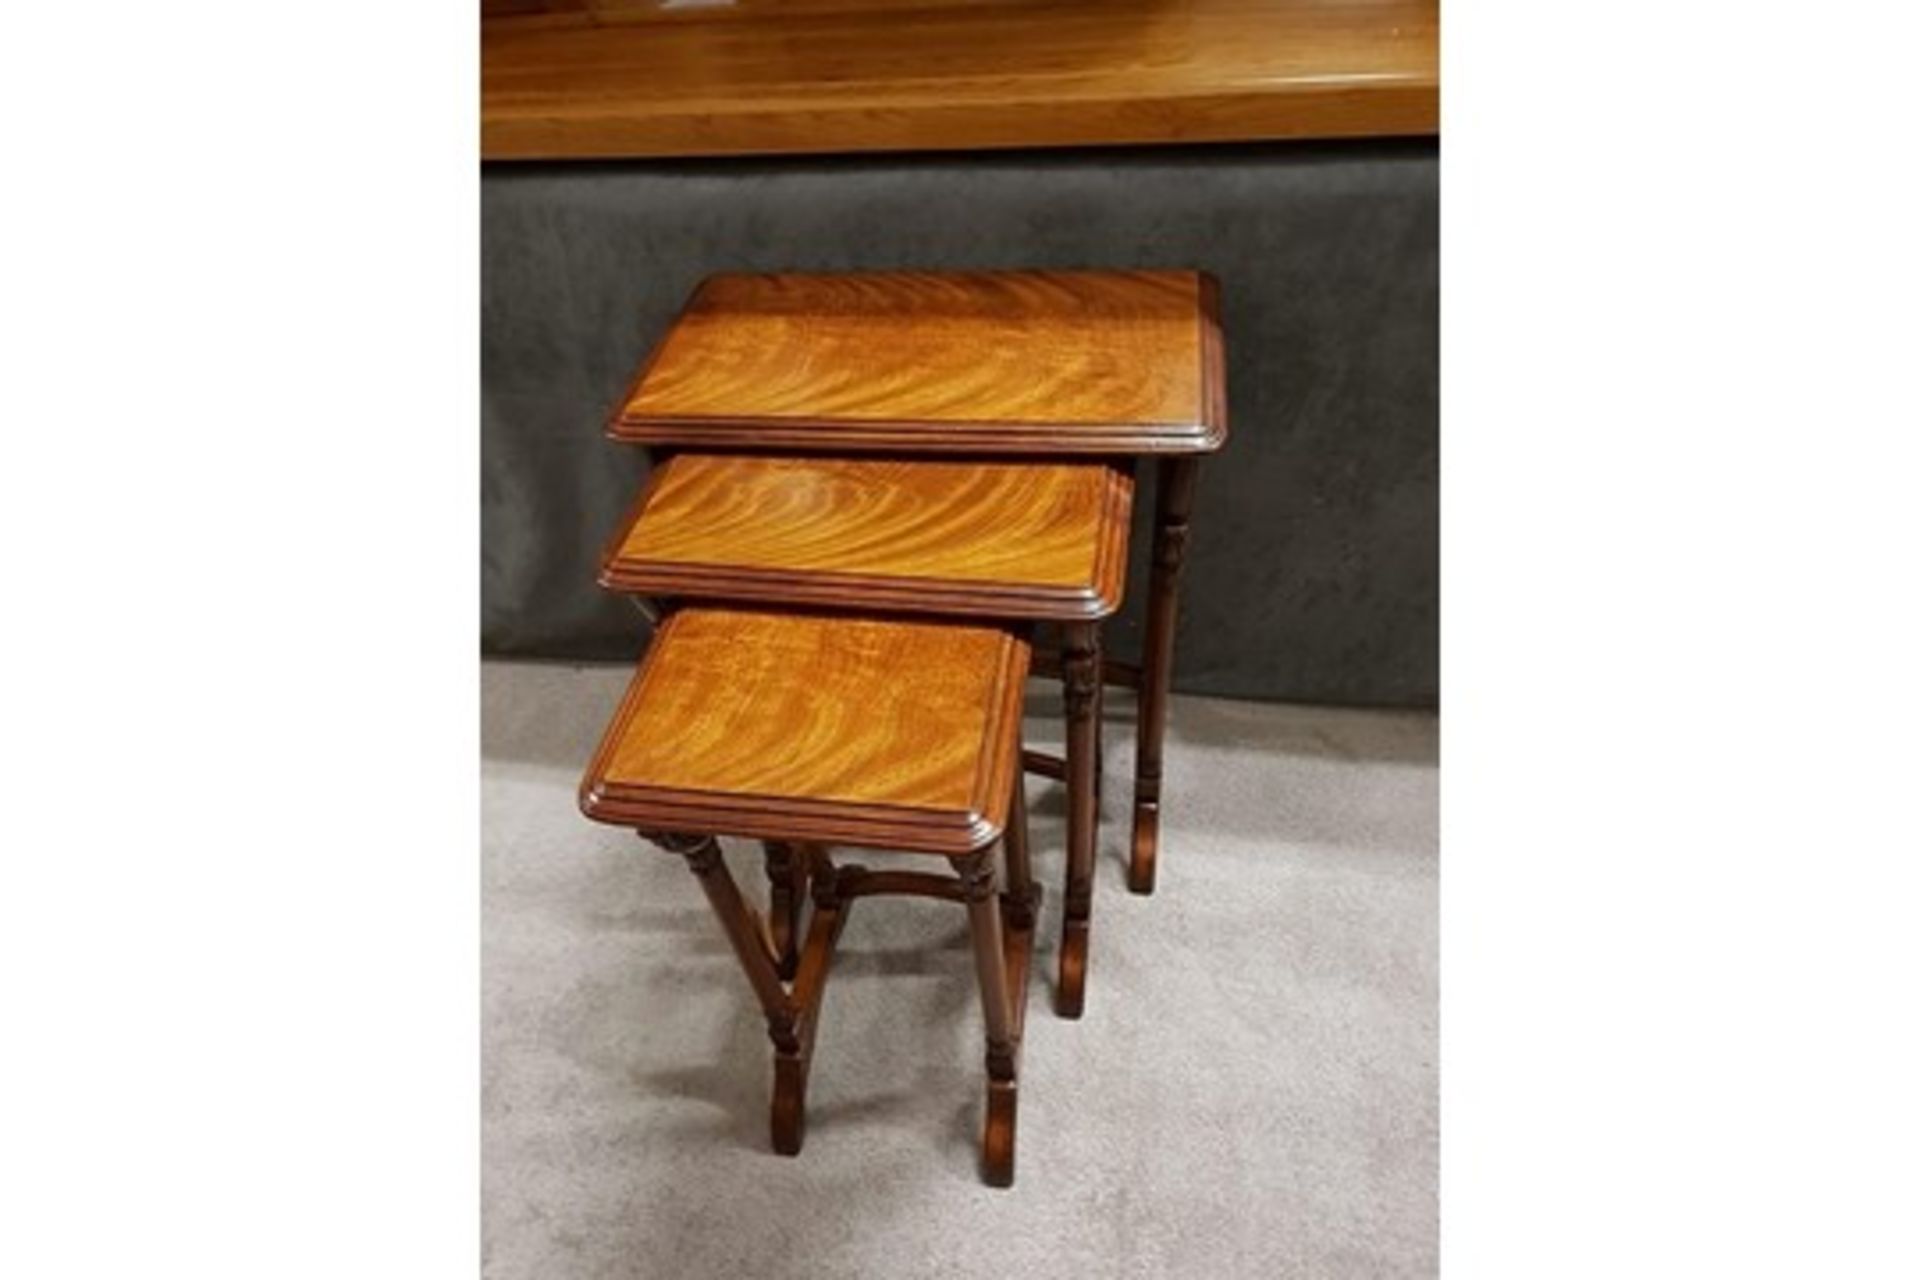 Century Furniture Manor Nesting Tables These Three Nesting Tables Feature Rectangular Tops Of